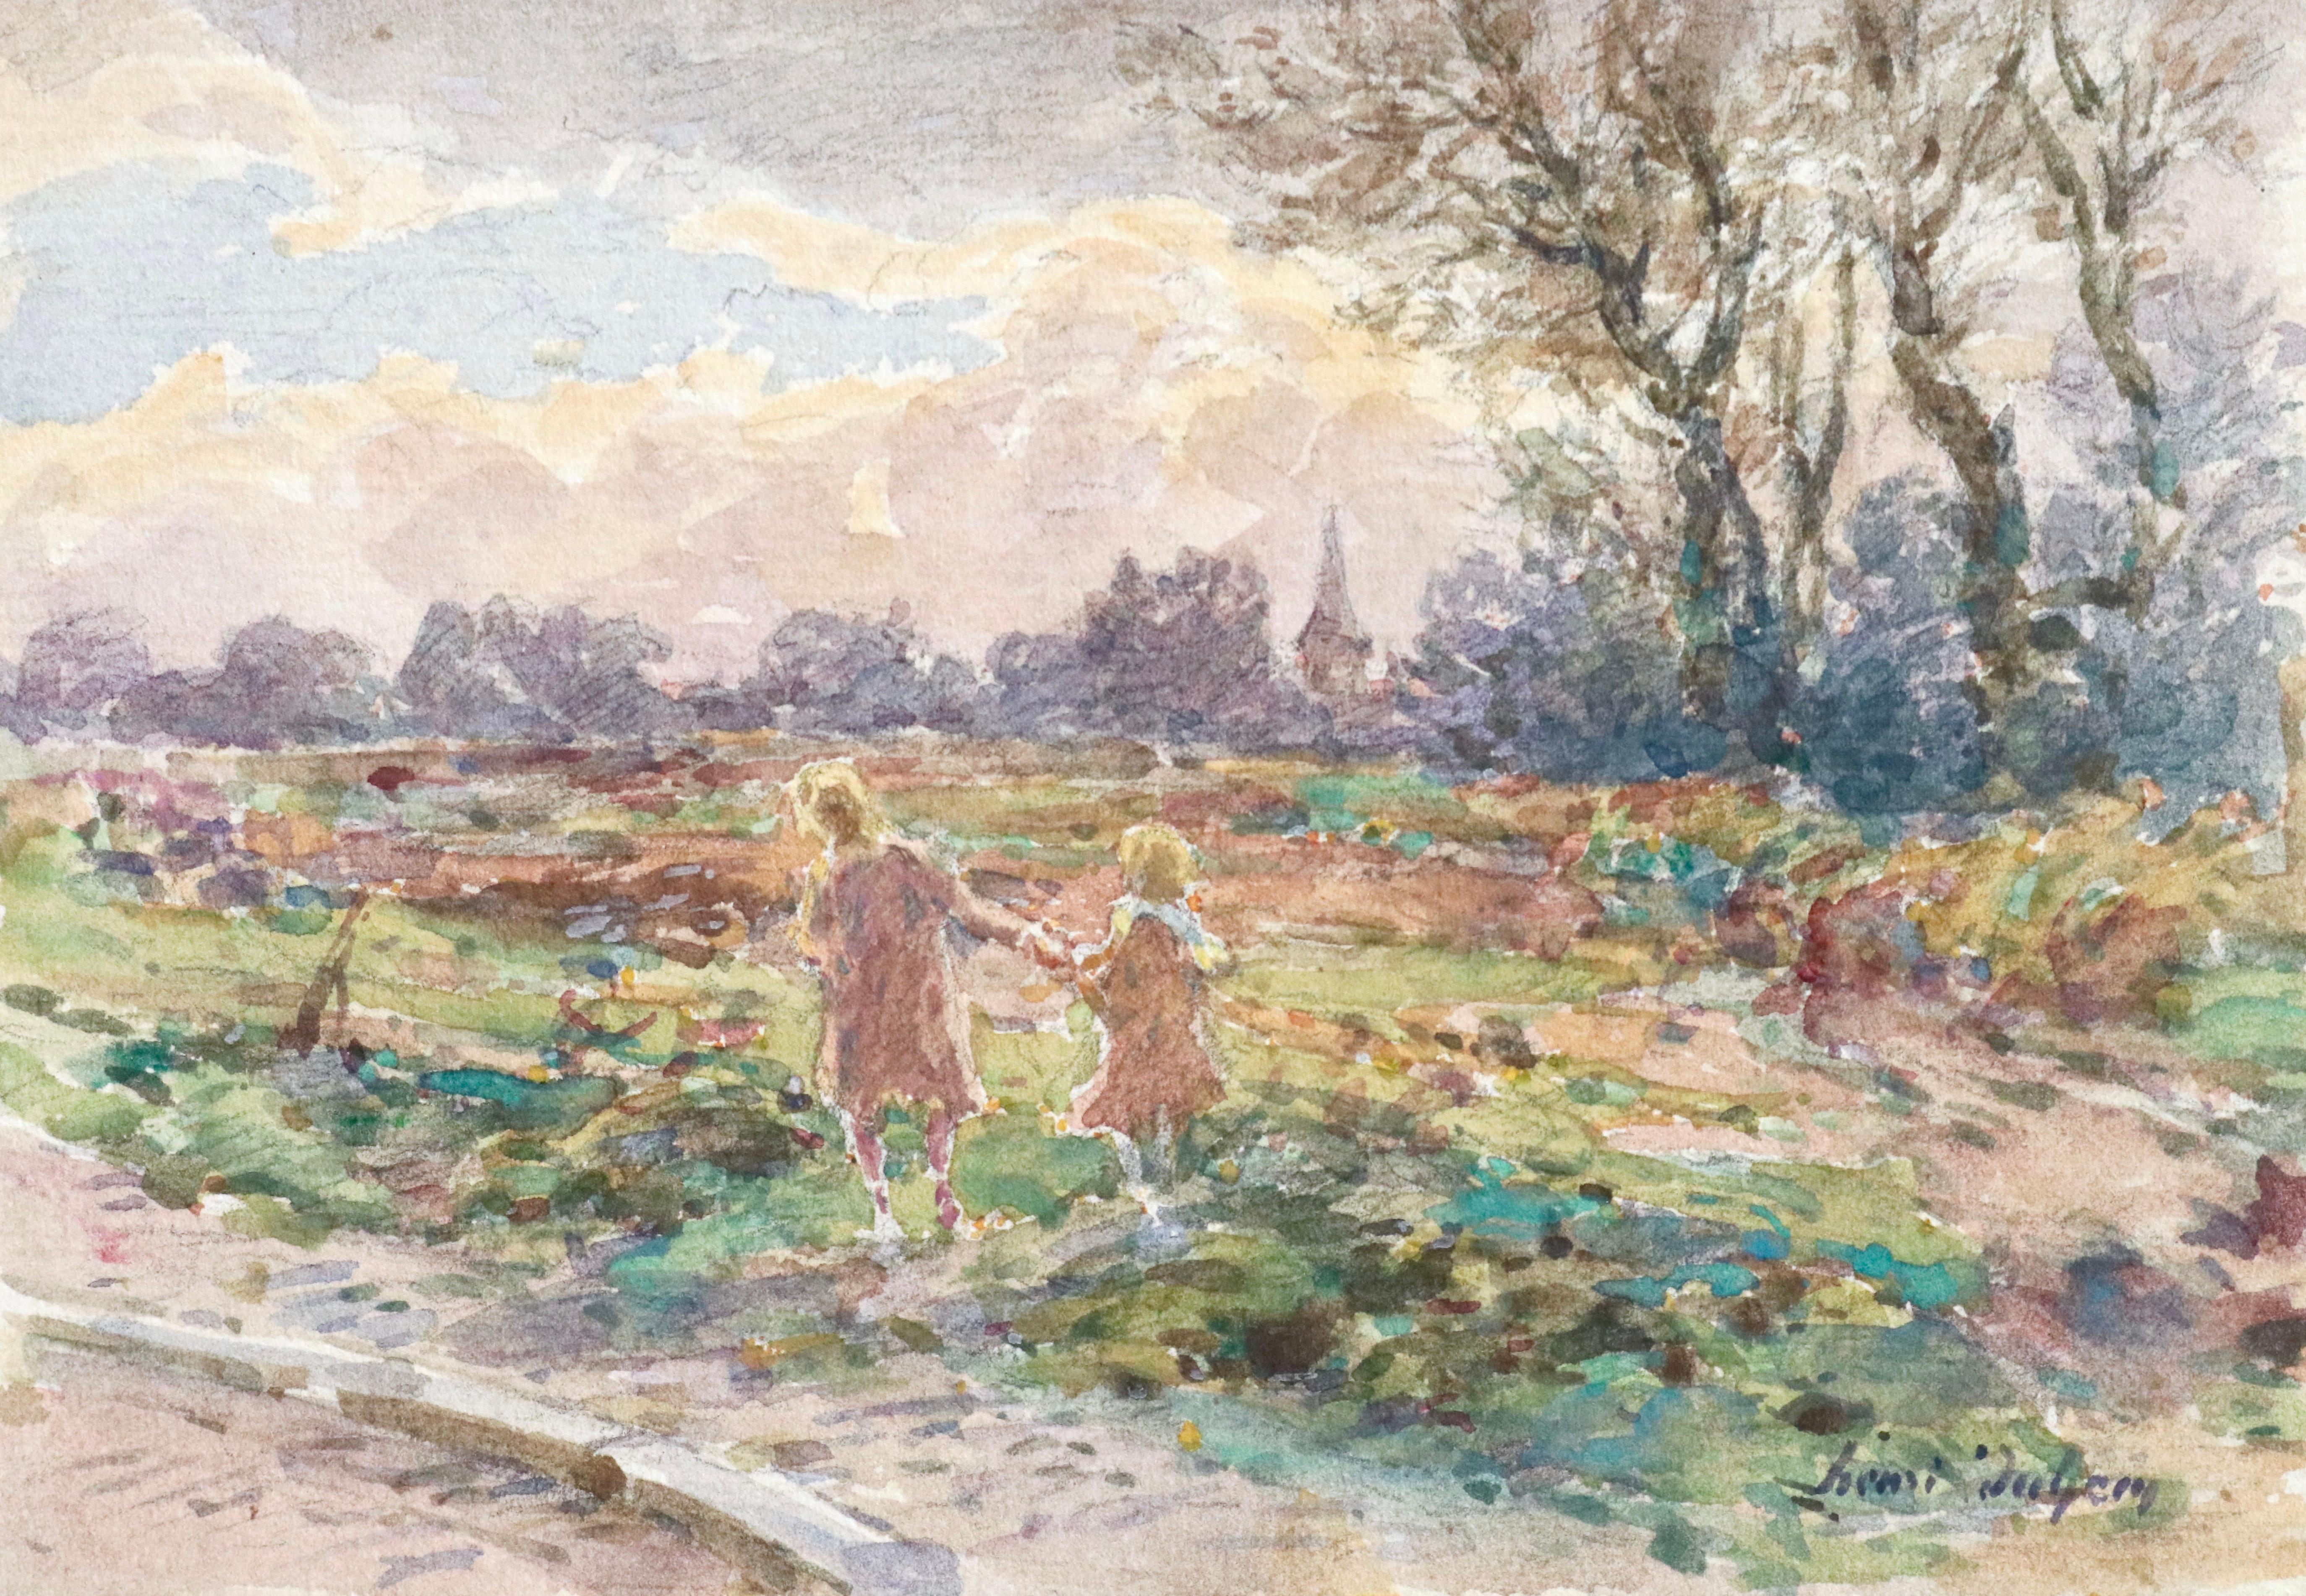 Watercolour on paper circa 1910 by Henri Duhem depicting two young girls holding hands as they walk across a meadow, a church in the distance. Signed lower right. This painting is not currently framed but a suitable frame can be sourced if